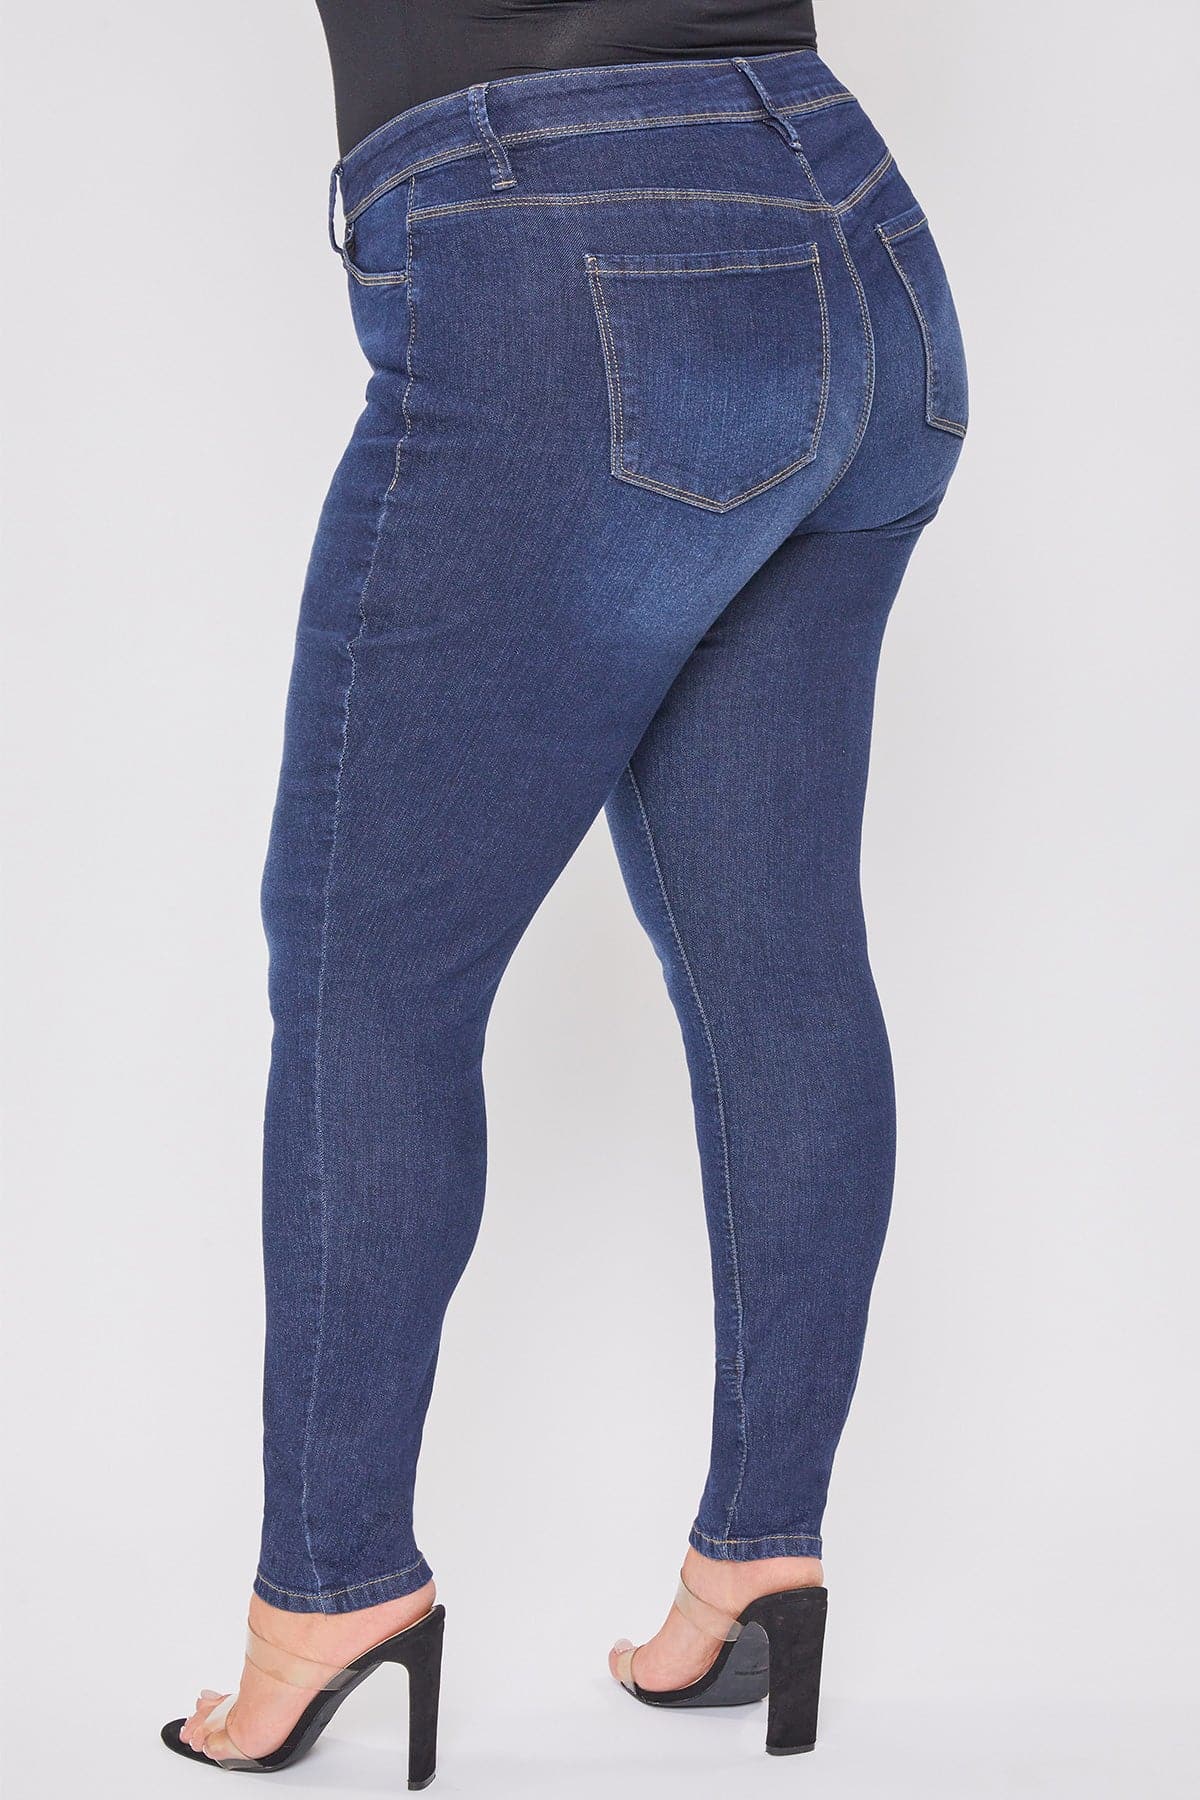 Women's Plus Size Sustainable Essential Skinny Jeans